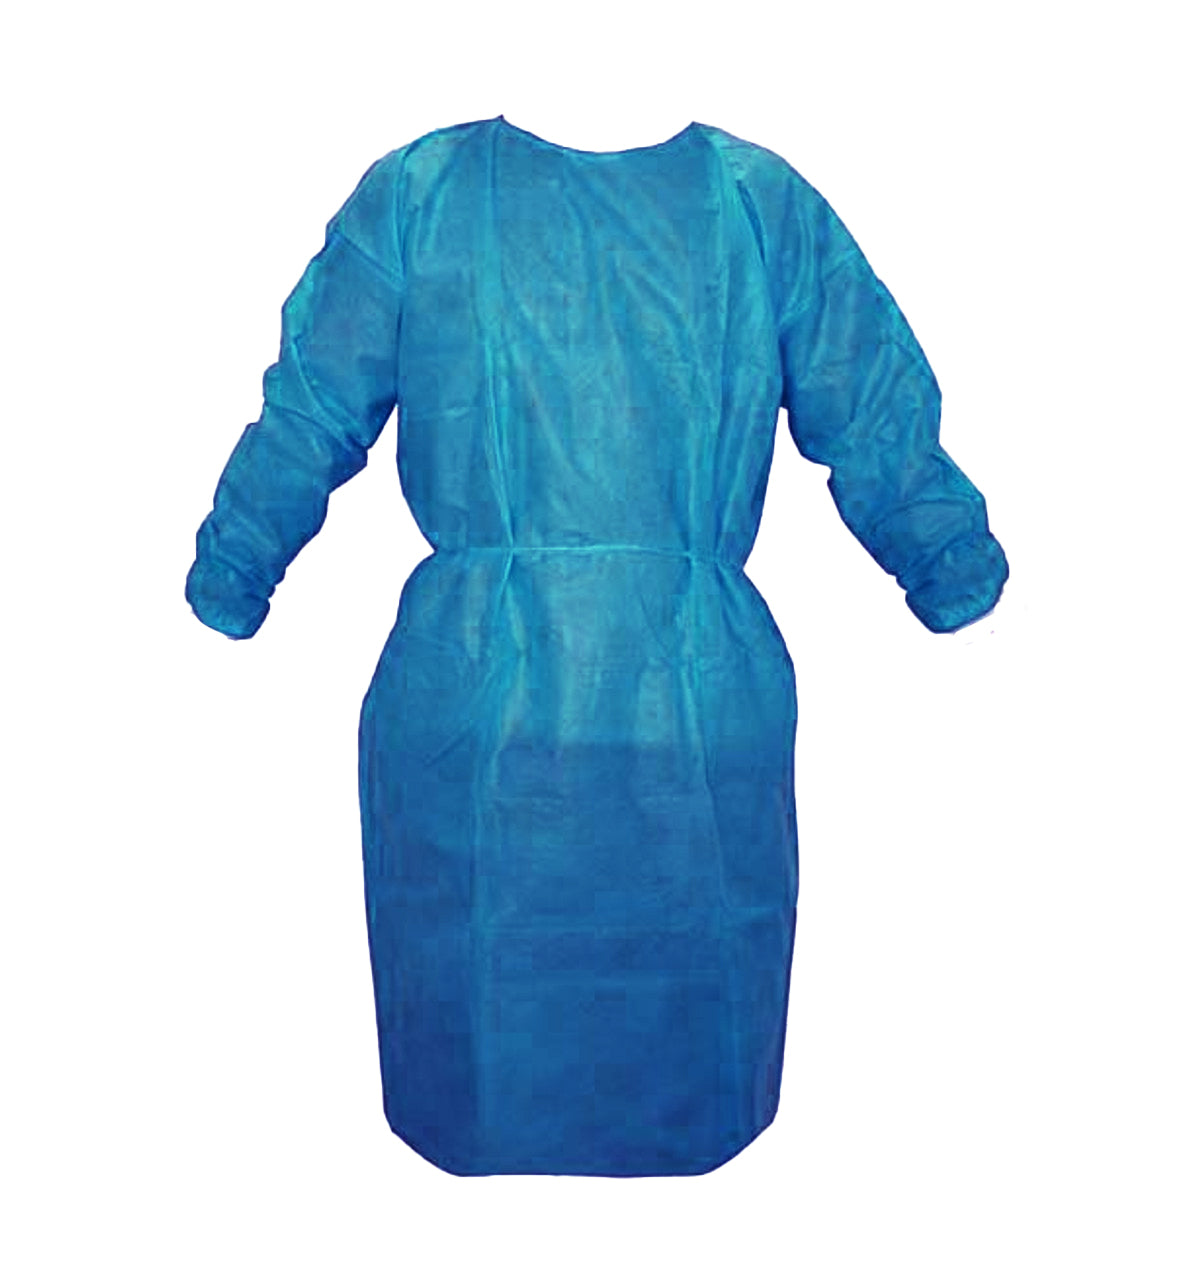 Disposable Medical Protective Gown - 10pcs - Dark Blue